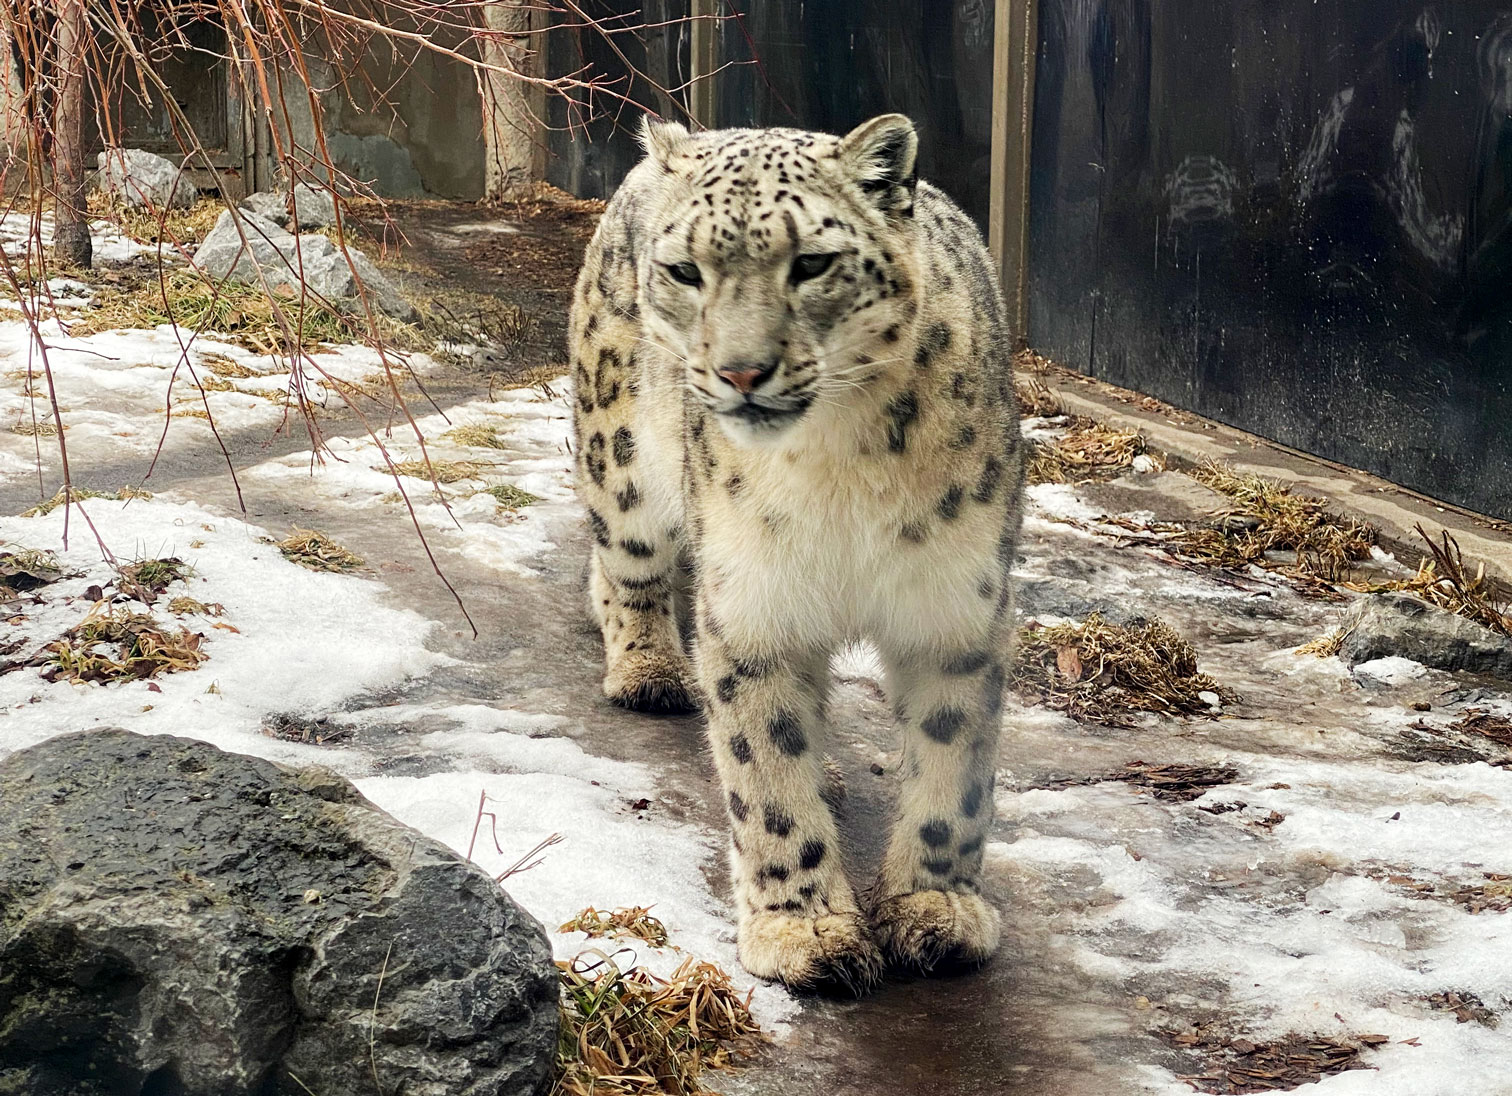 Snow Leopard at the Calgary Zoo